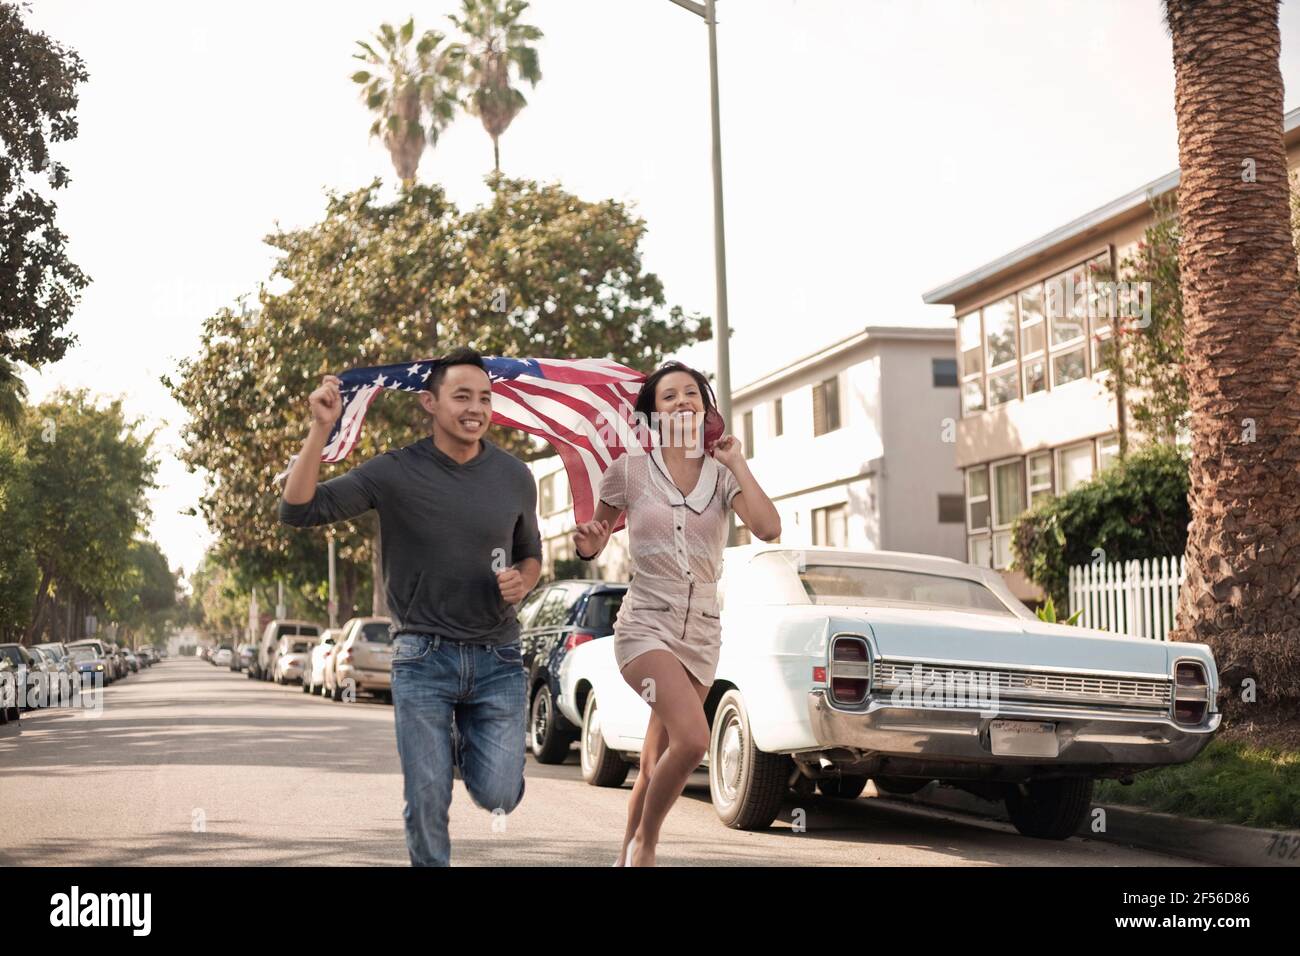 Young male and female running with American flag on street Stock Photo